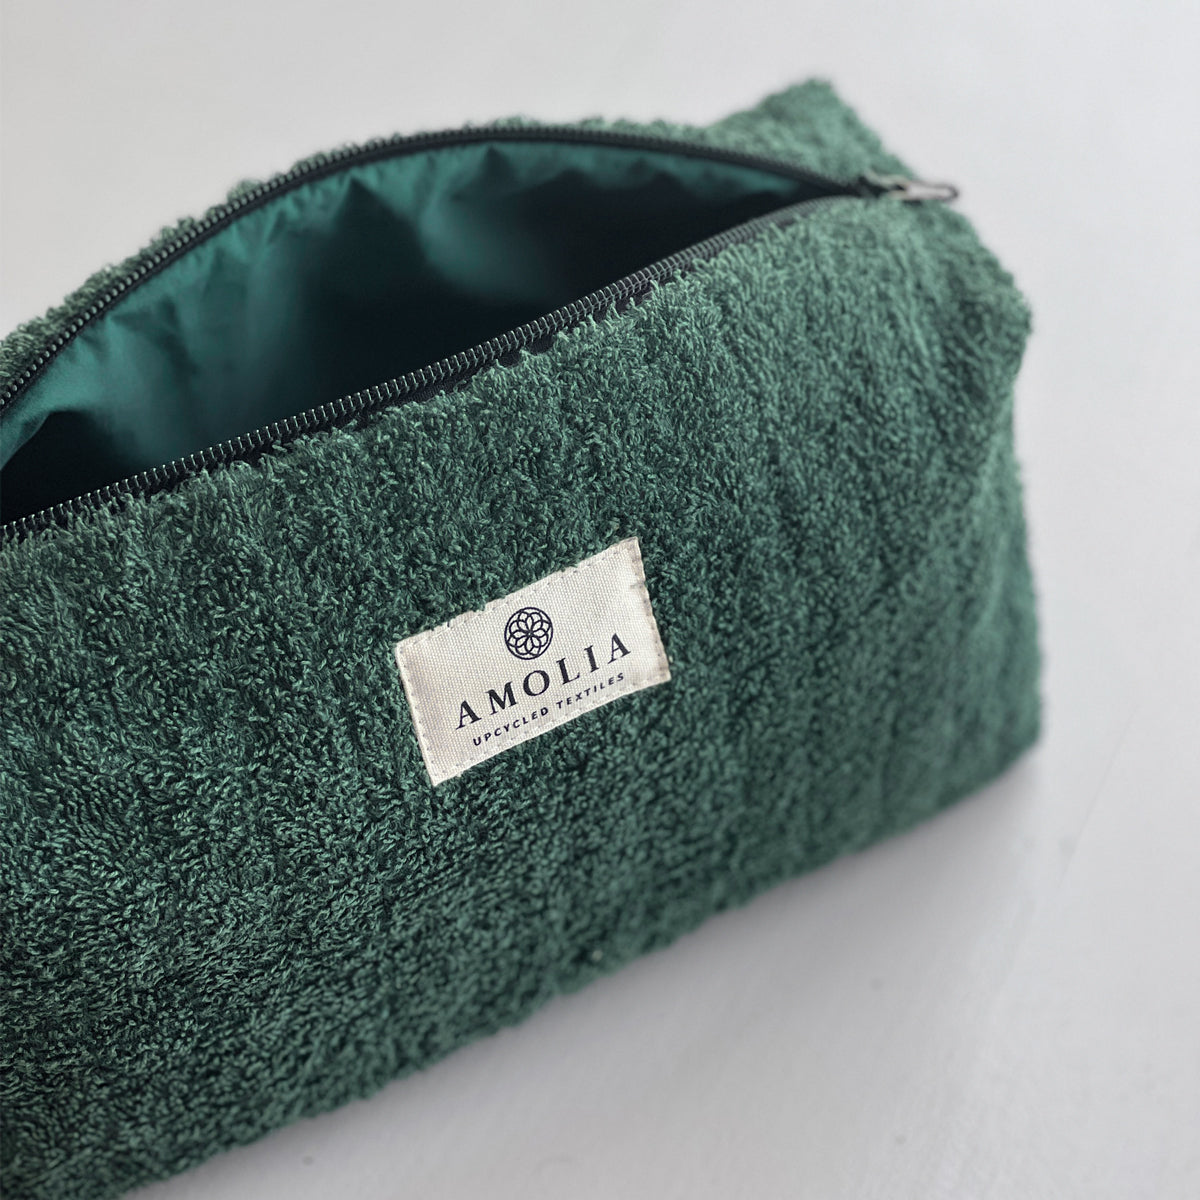 Upcycled toiletry bag, small, forest green